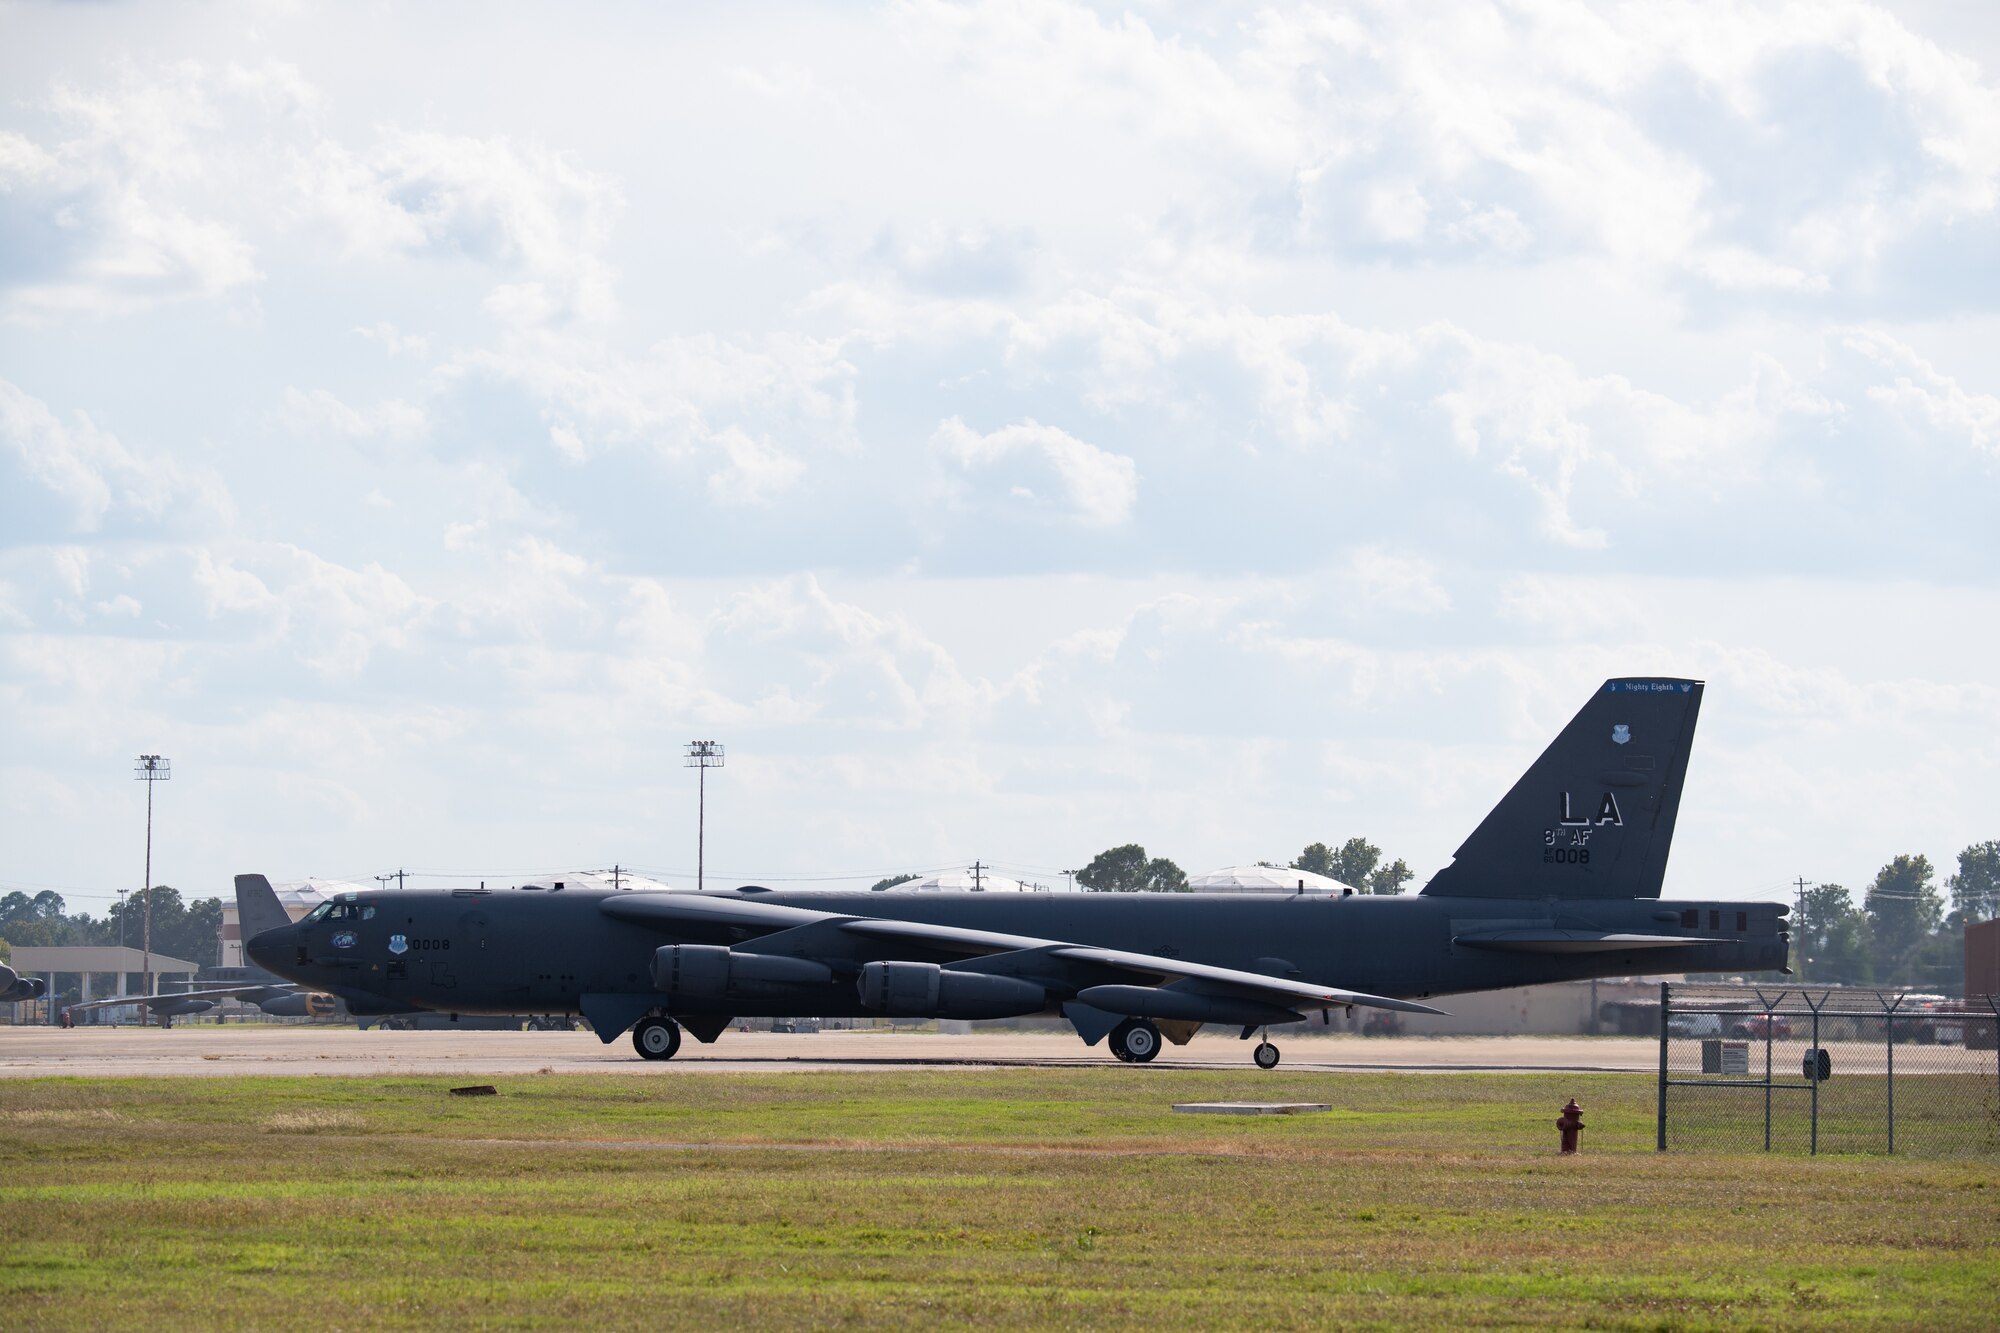 A B-52H Stratofortress taxis from Barksdale Air Force Base, Louisiana, Oct. 21, 2021. Maintenance teams, aircrew, and Airmen across the 2nd Bomb Wing participated in a readiness exercise to showcase nuclear combat capability. (U.S. Air Force photo by Staff Sgt. Christopher Tam)